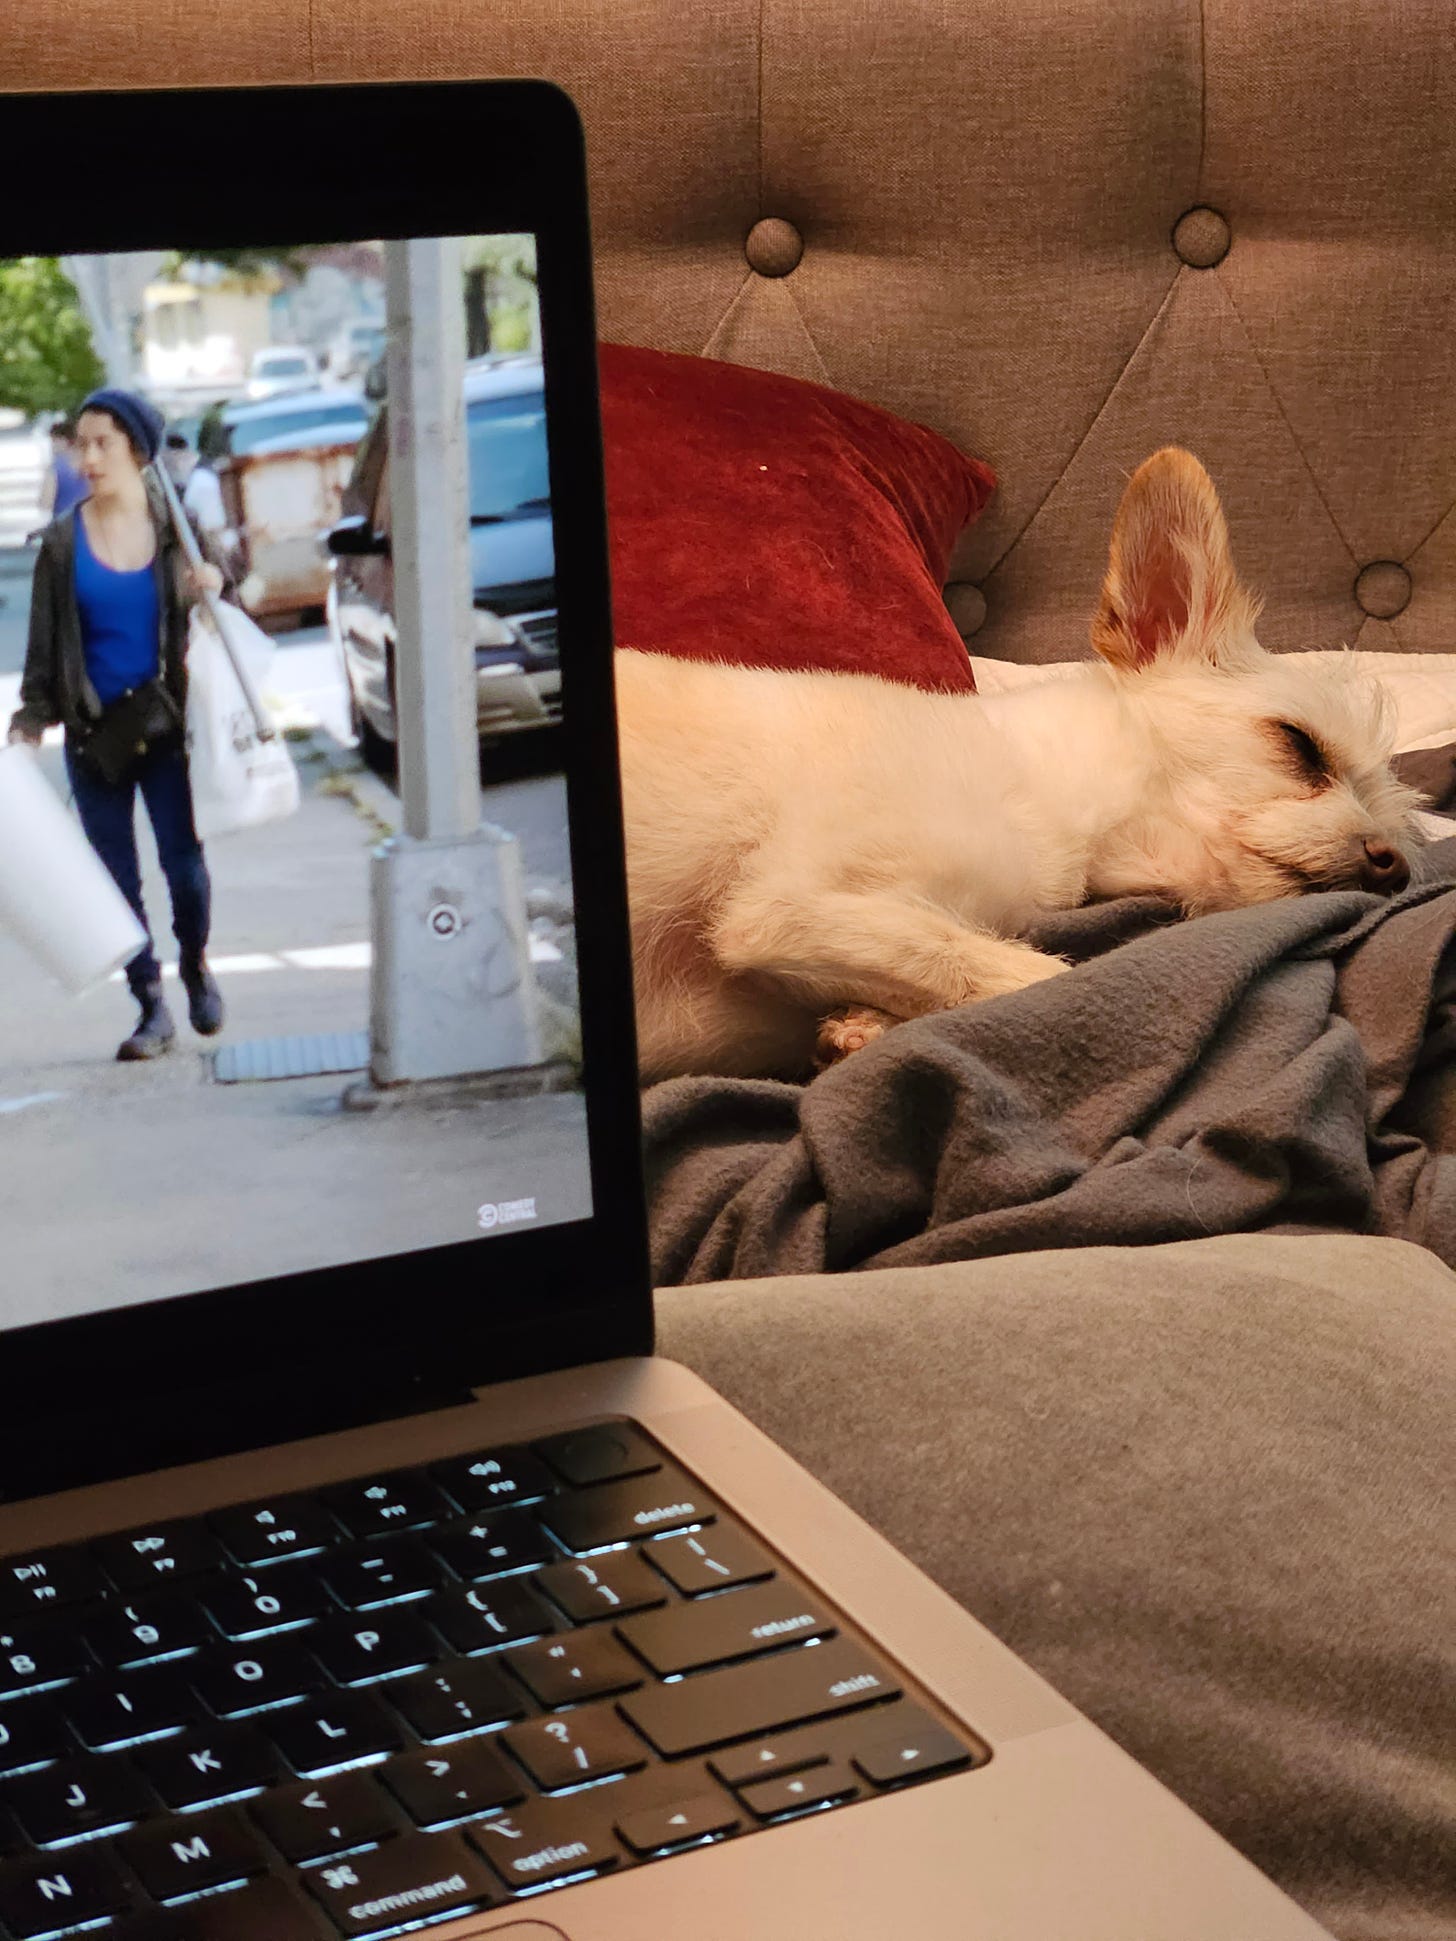 A laptop screen shows a still from "Broad City" in the foreground. Behind it, Emily's small white chihuahua-like dog, Oliver, sleeps peacefully in a pile of blankets.